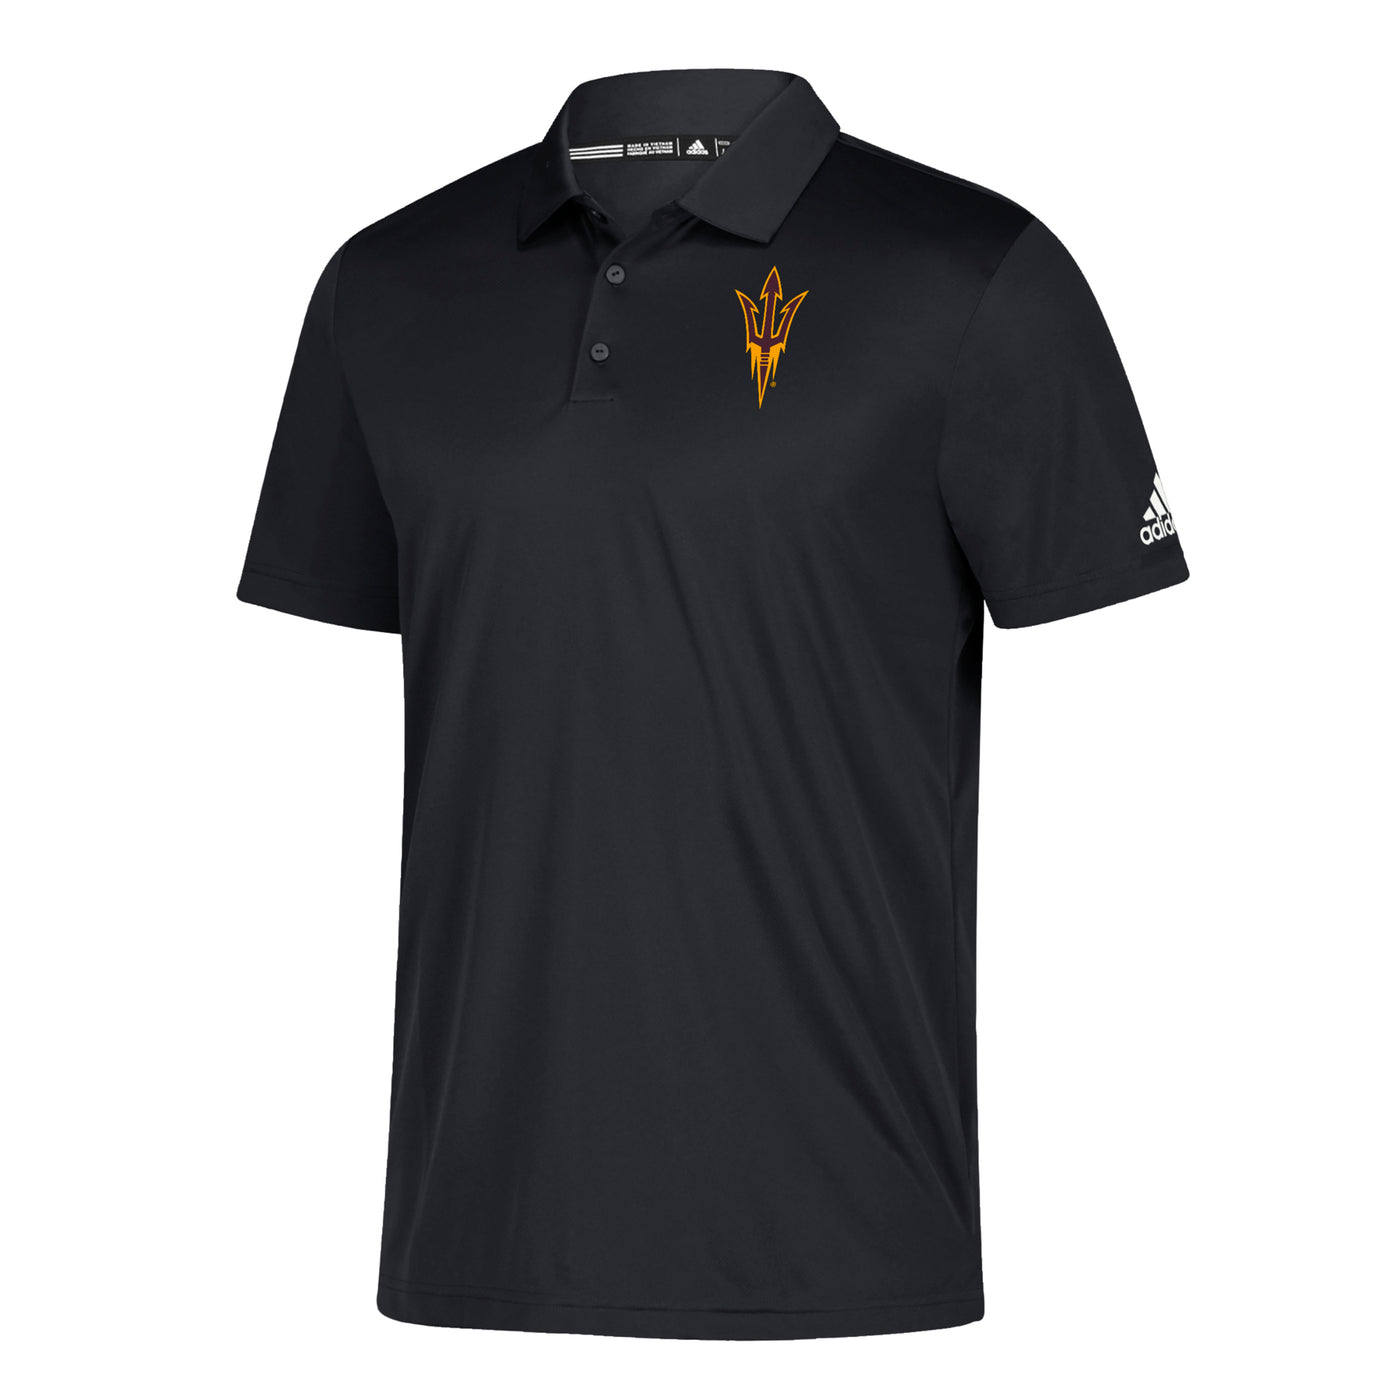 ASU black Adidas polo with a pitchfork on the chest